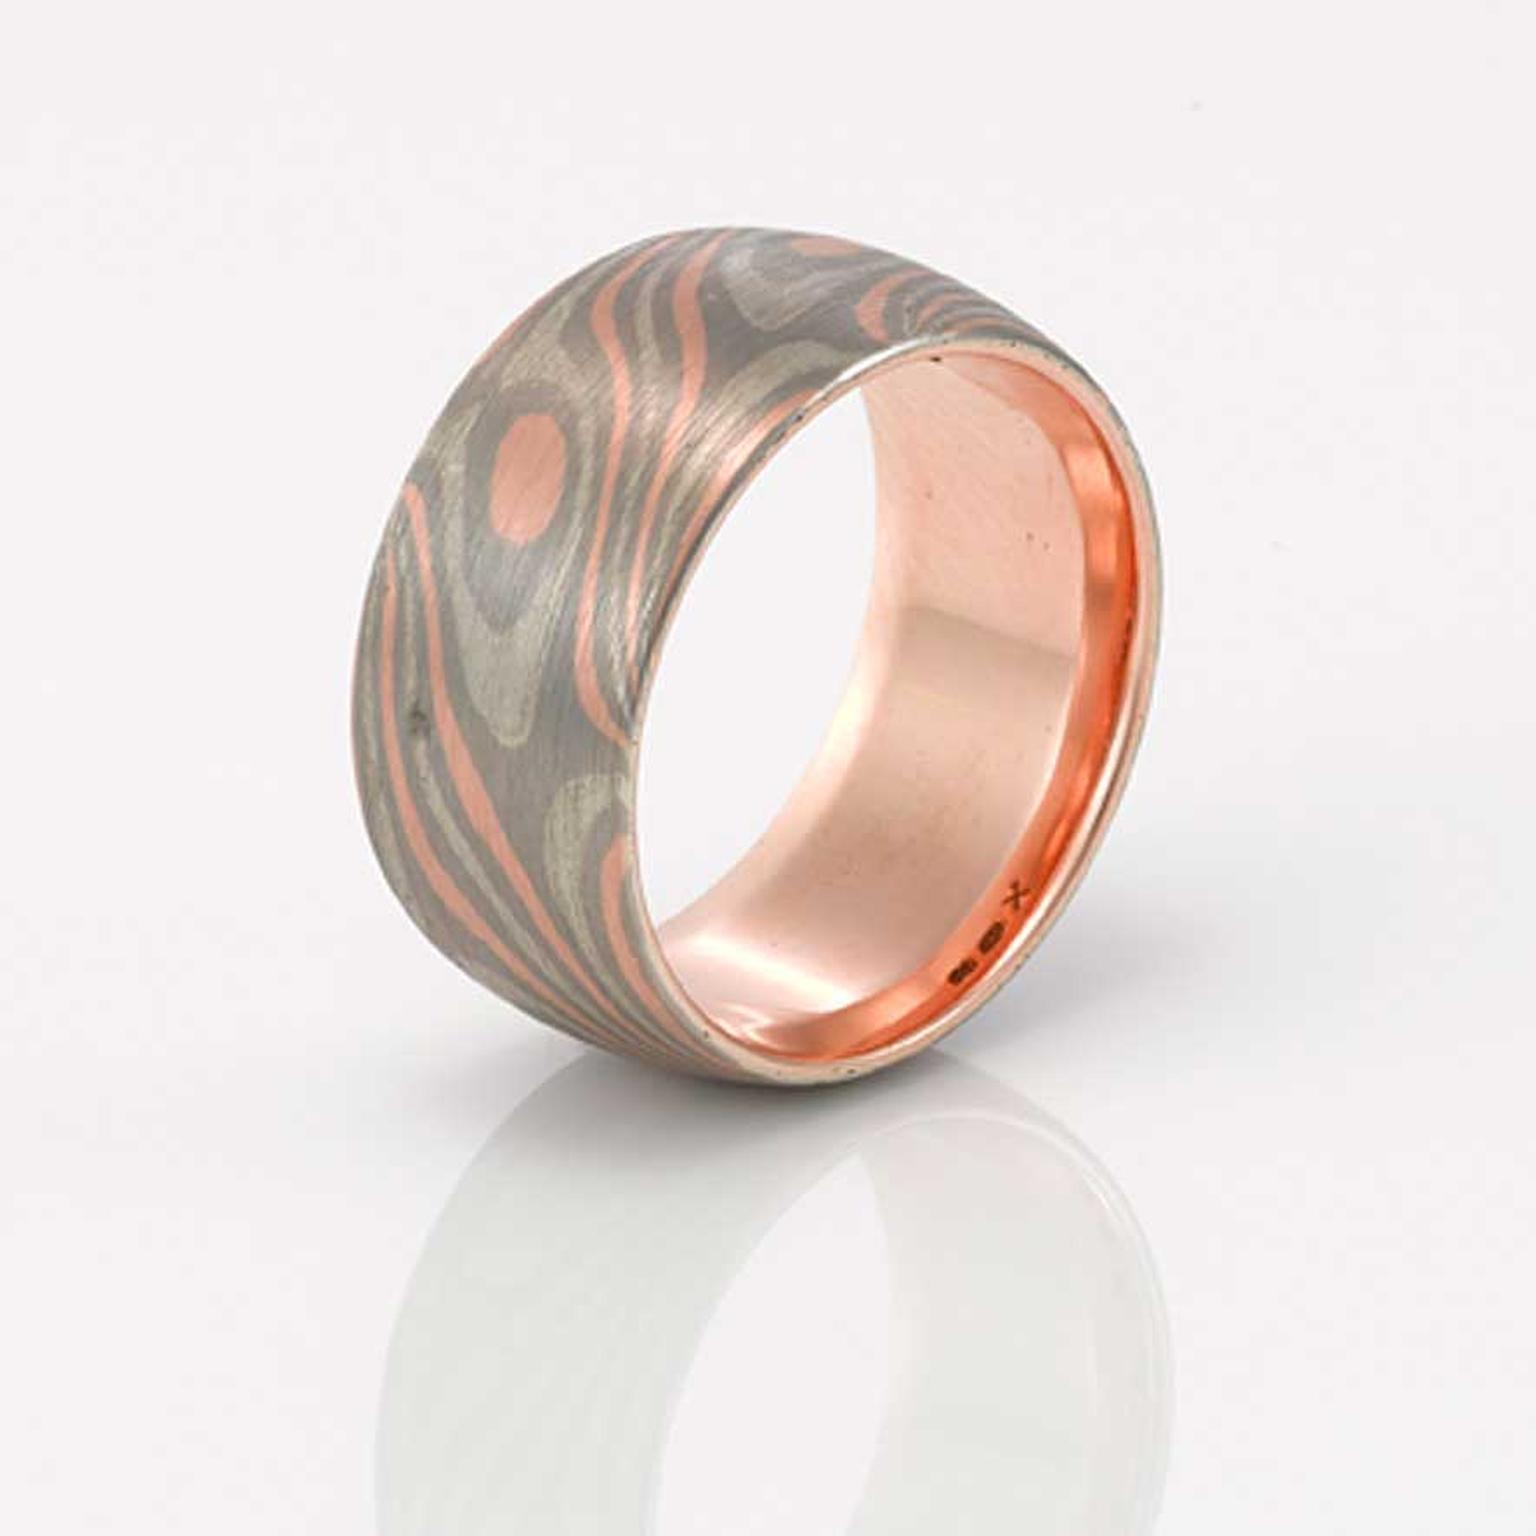 Apollo wedding ring for men in rose gold, dark palladium and silver from Mondial by Nadia Neuman